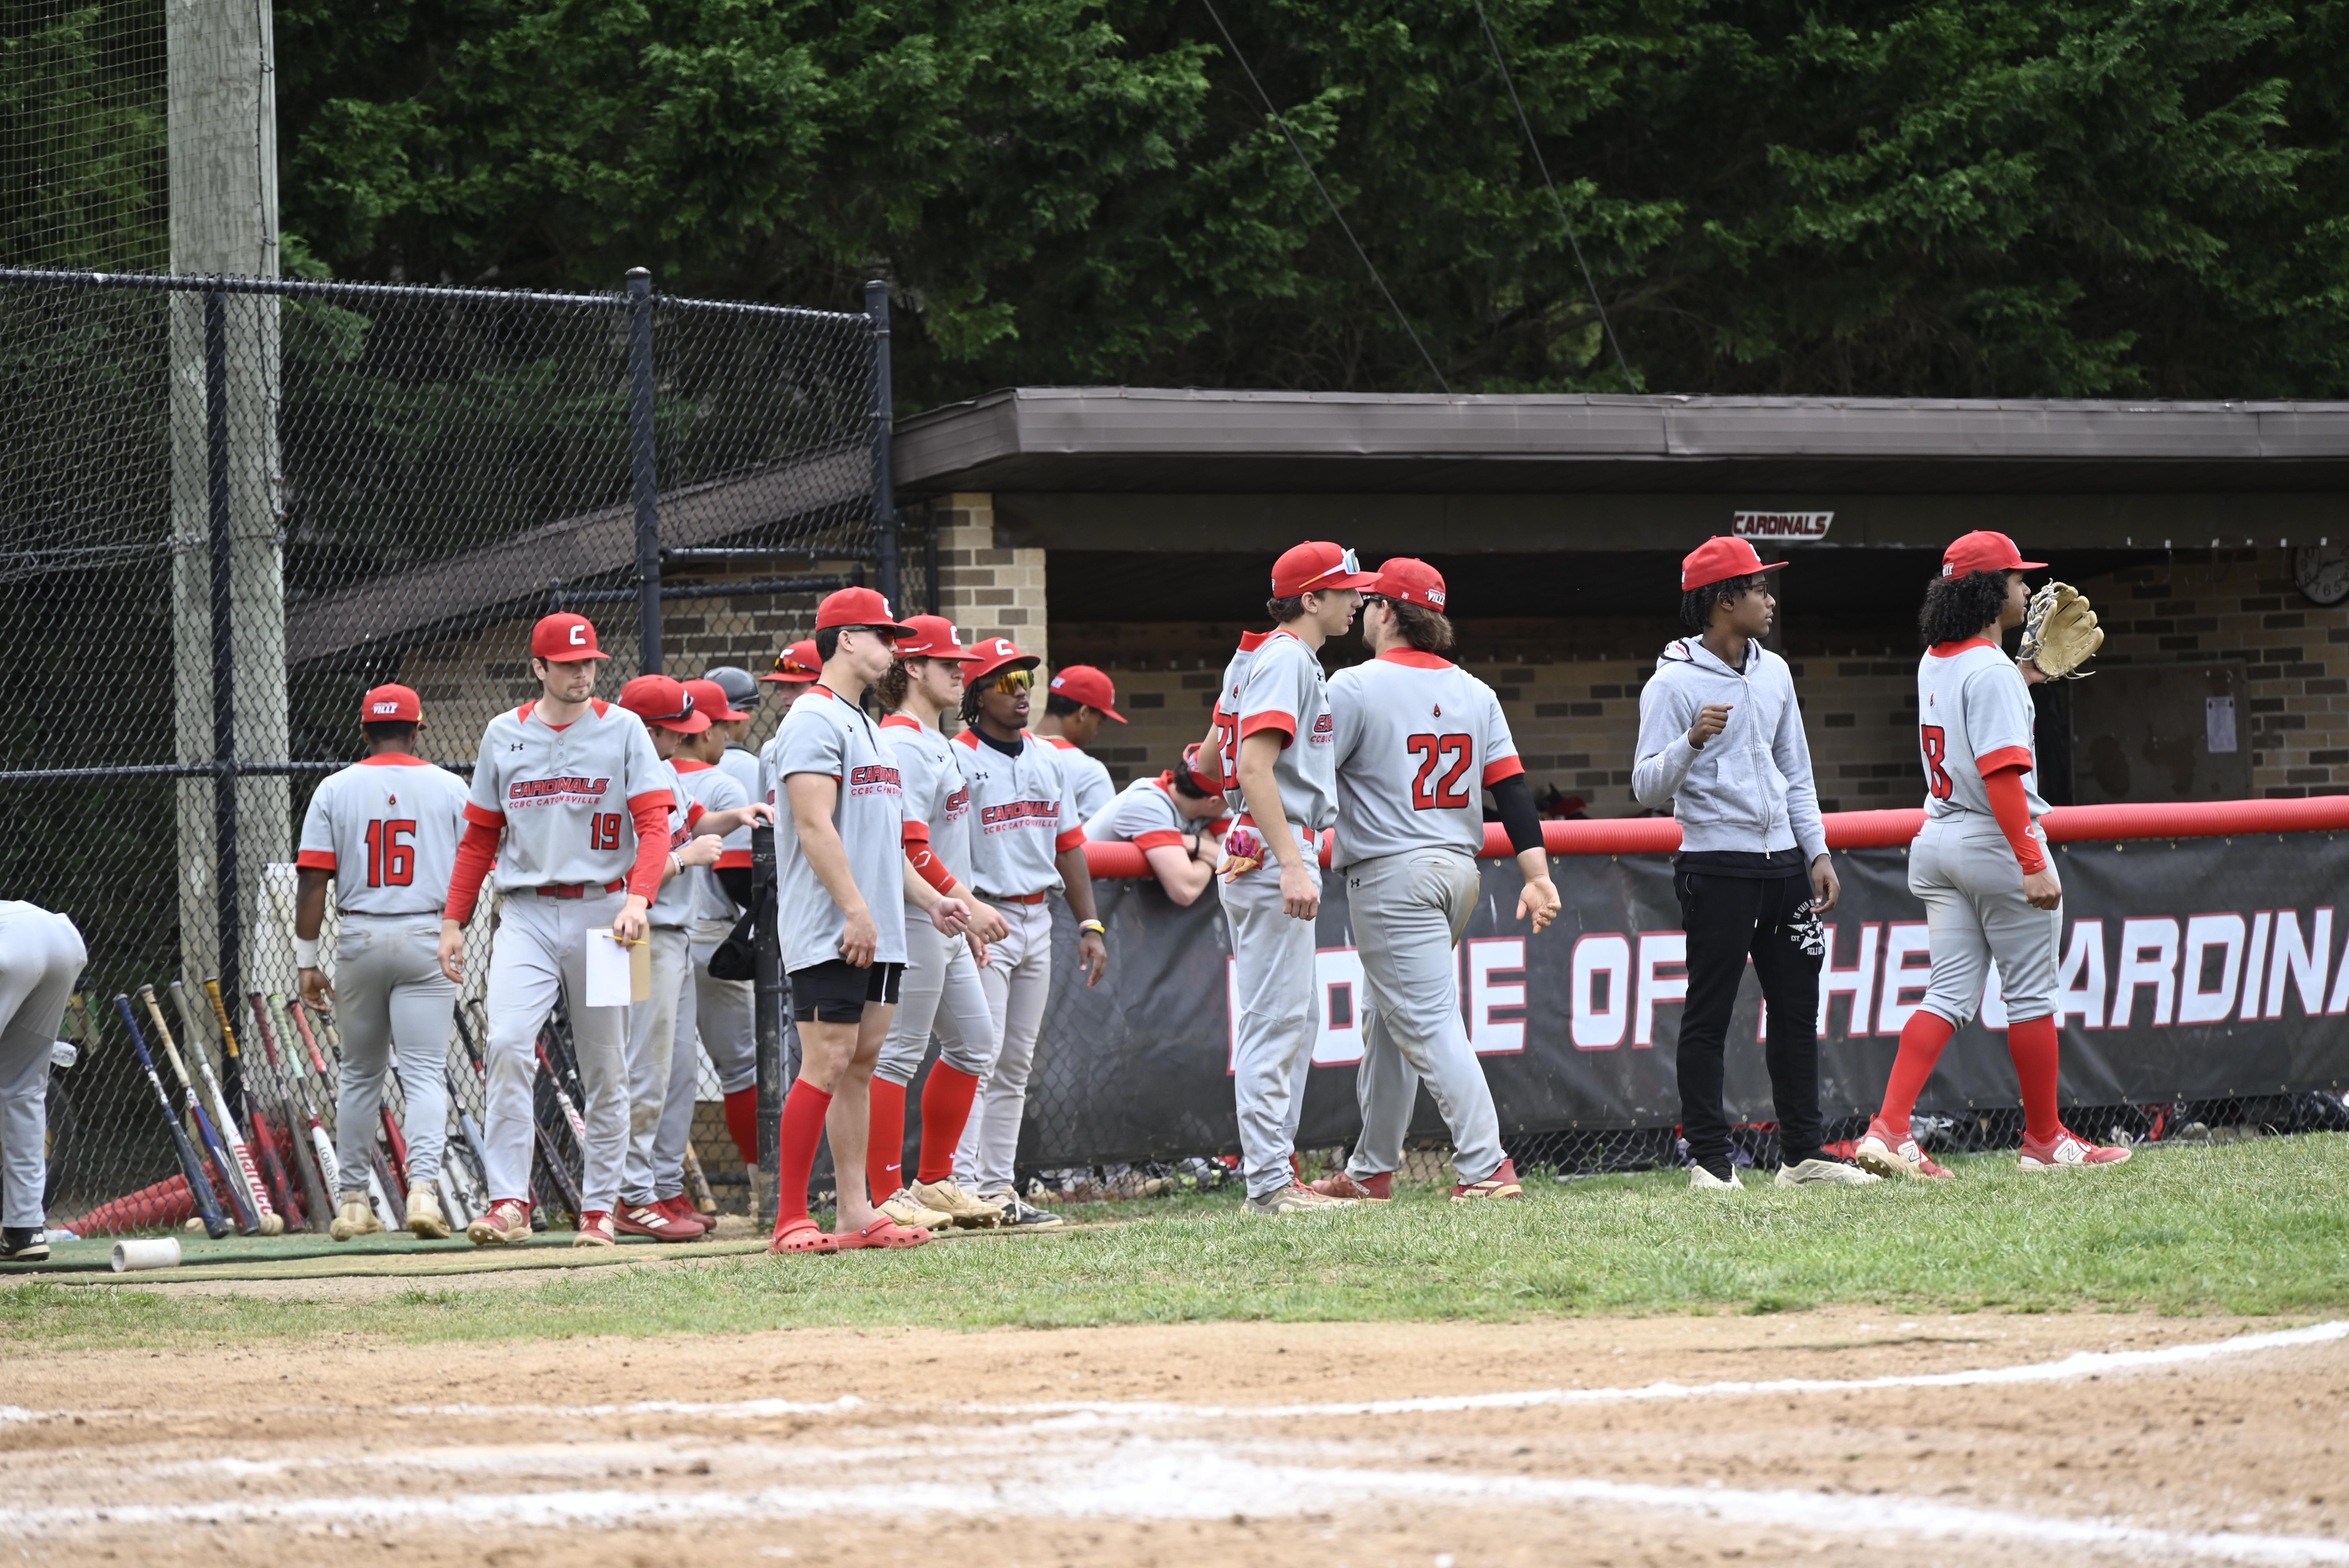 CCBC Catonsville vs Allegany College of Maryland Game 2 Recap